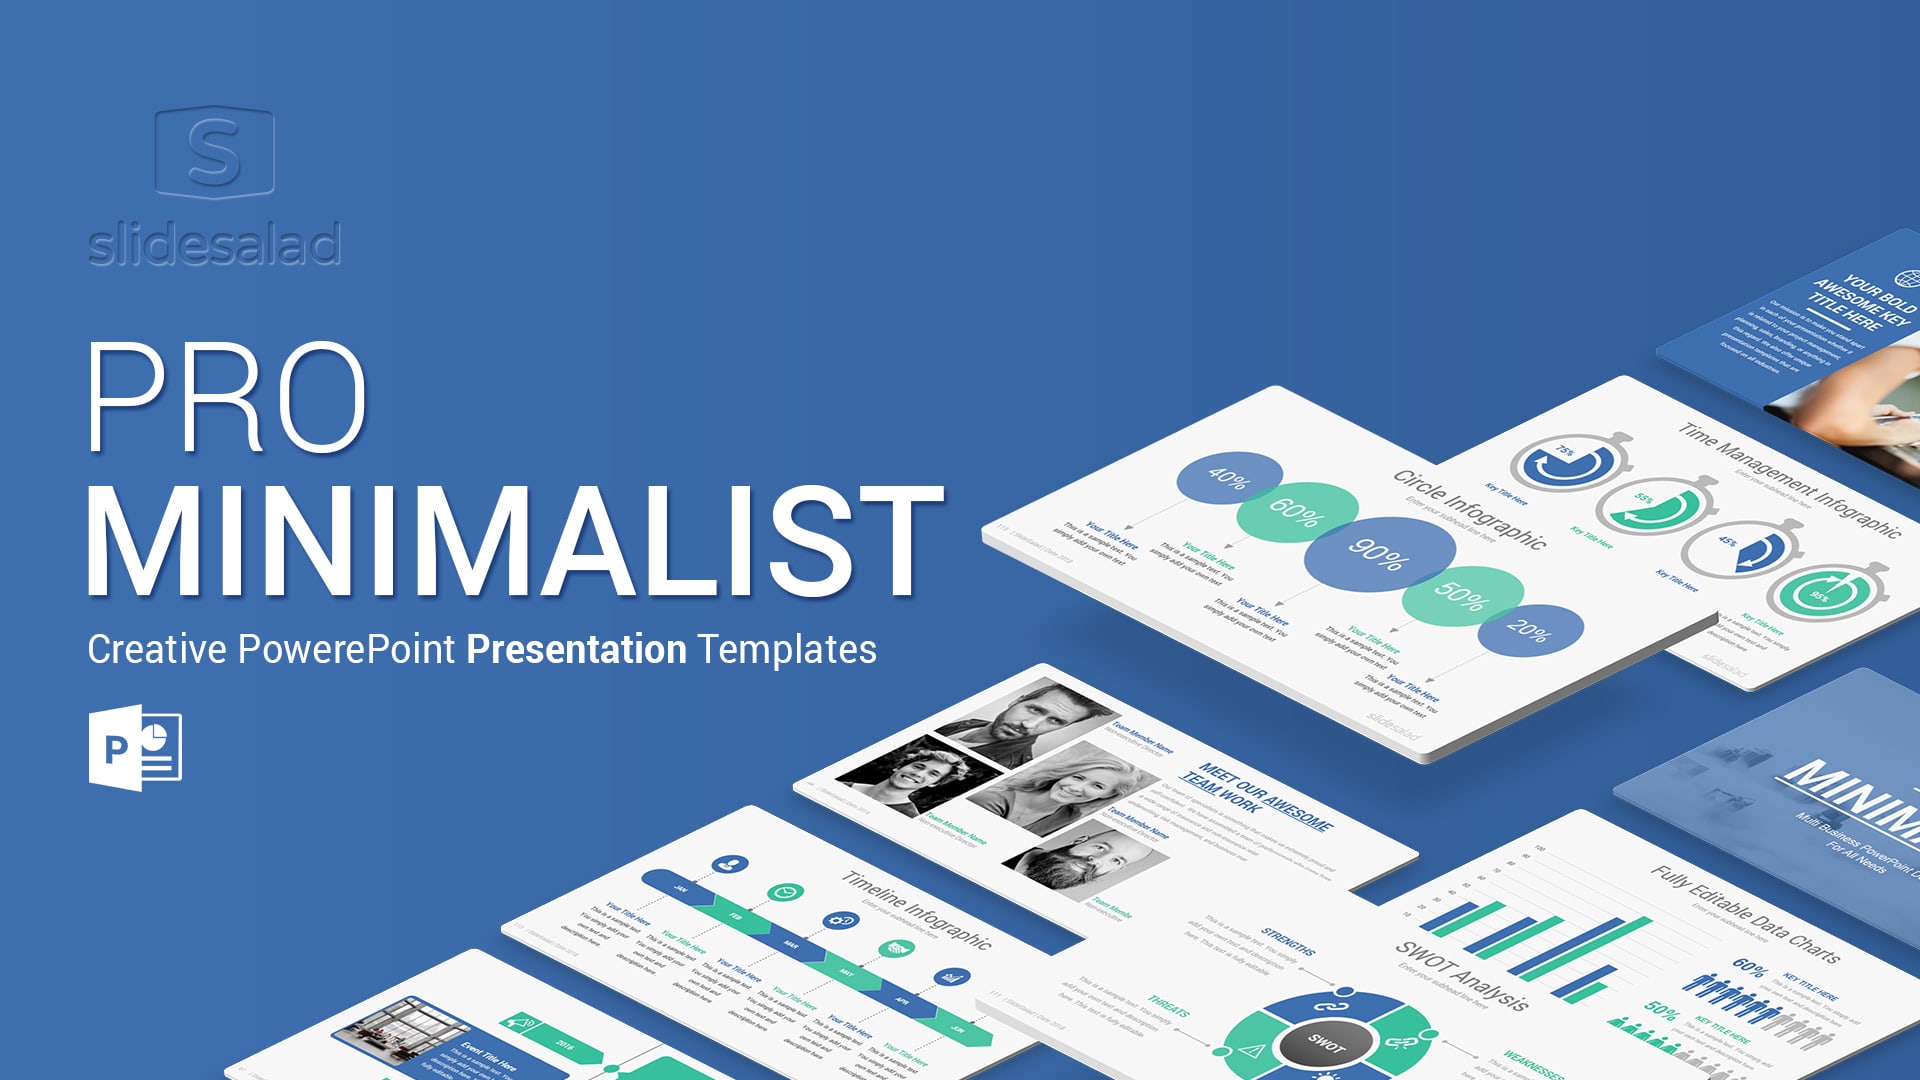 40 Minimalist Ppt Templates To Make Simple Modern Powerpoint Presentations In 2021 Slidesalad